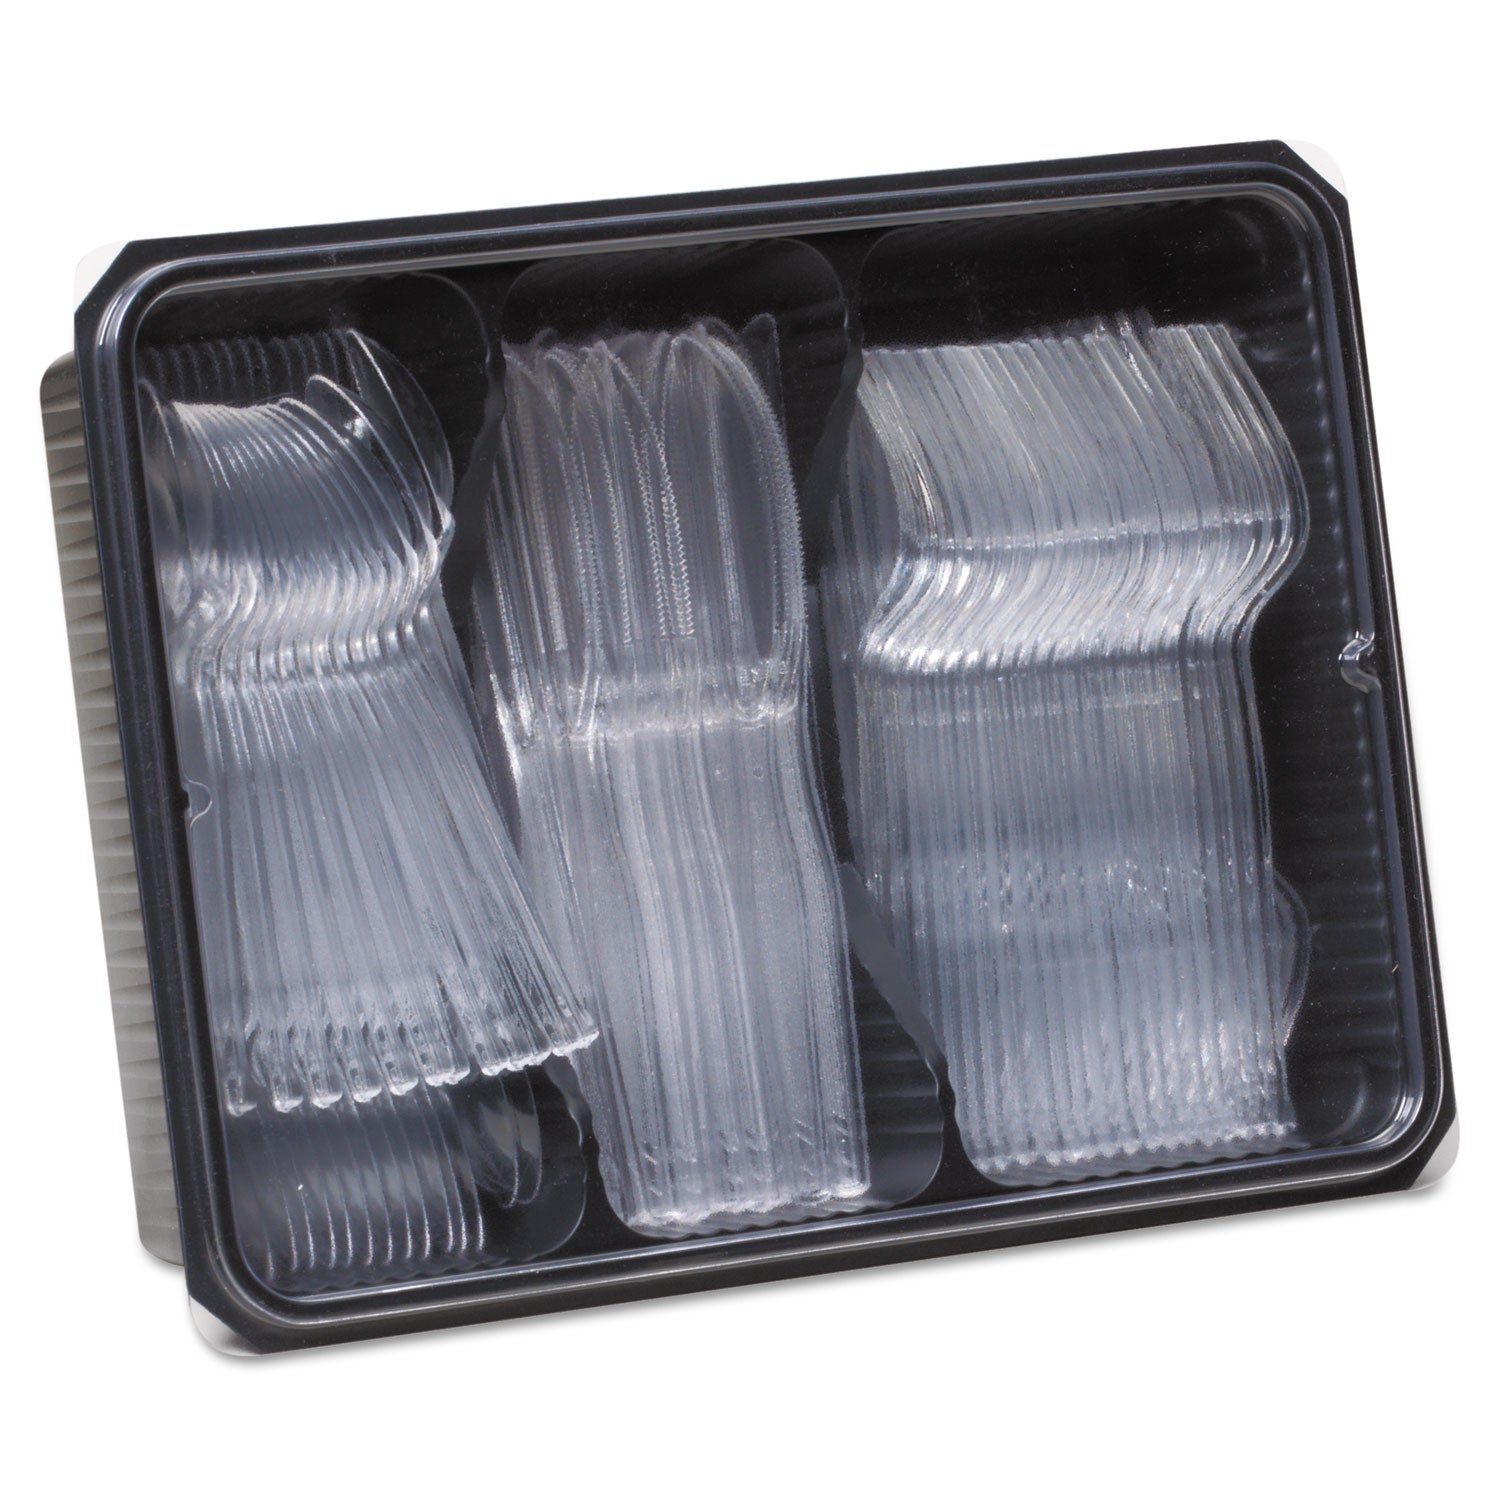 Cutlery Keeper Tray with Clear Plastic Utensils: 600 Forks, 600 Knives, 600 Spoons - 